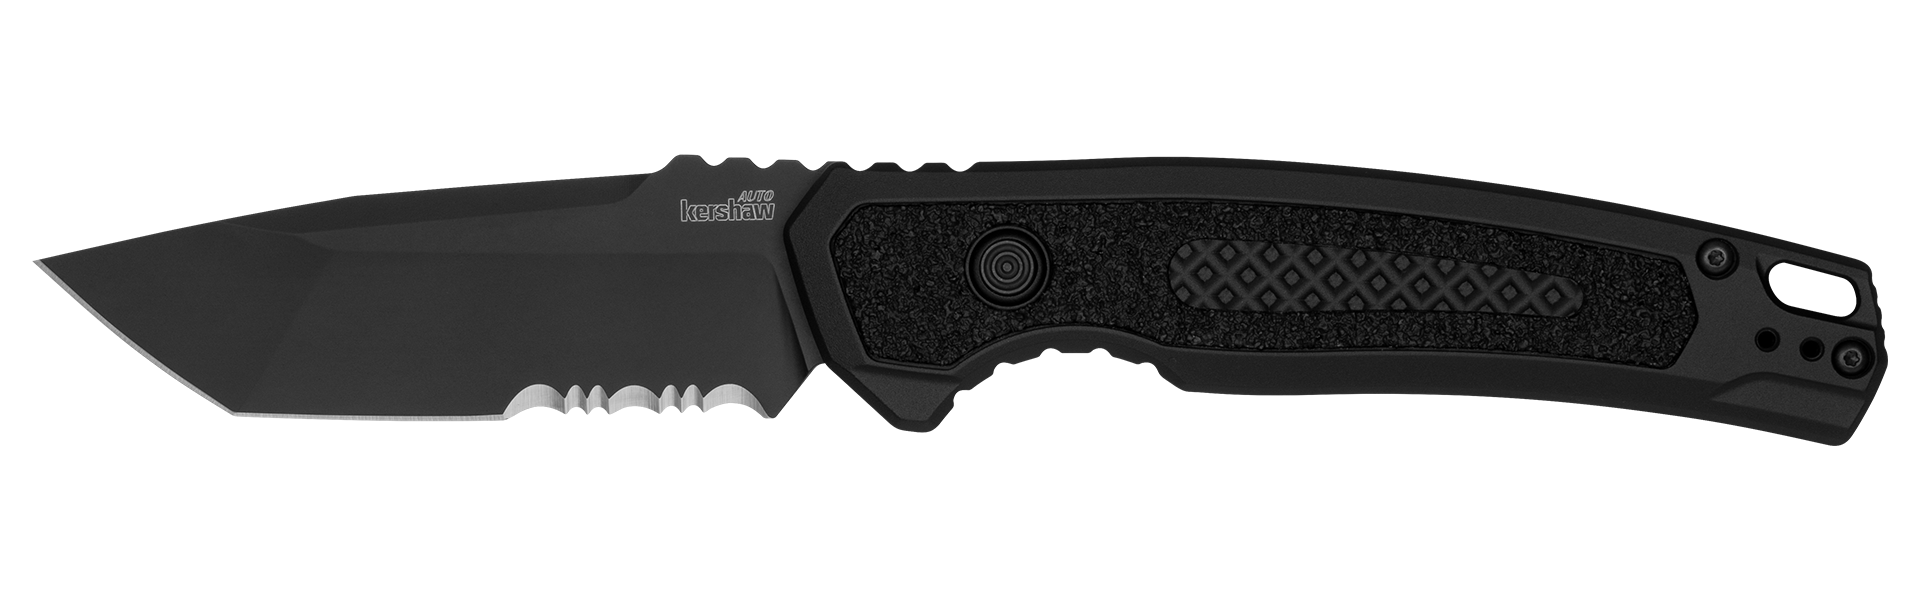 Kershaw Launch 16 - Automatic - Aluminum Handle with TracTec Inlay - CPM-M4 Steel - 7105